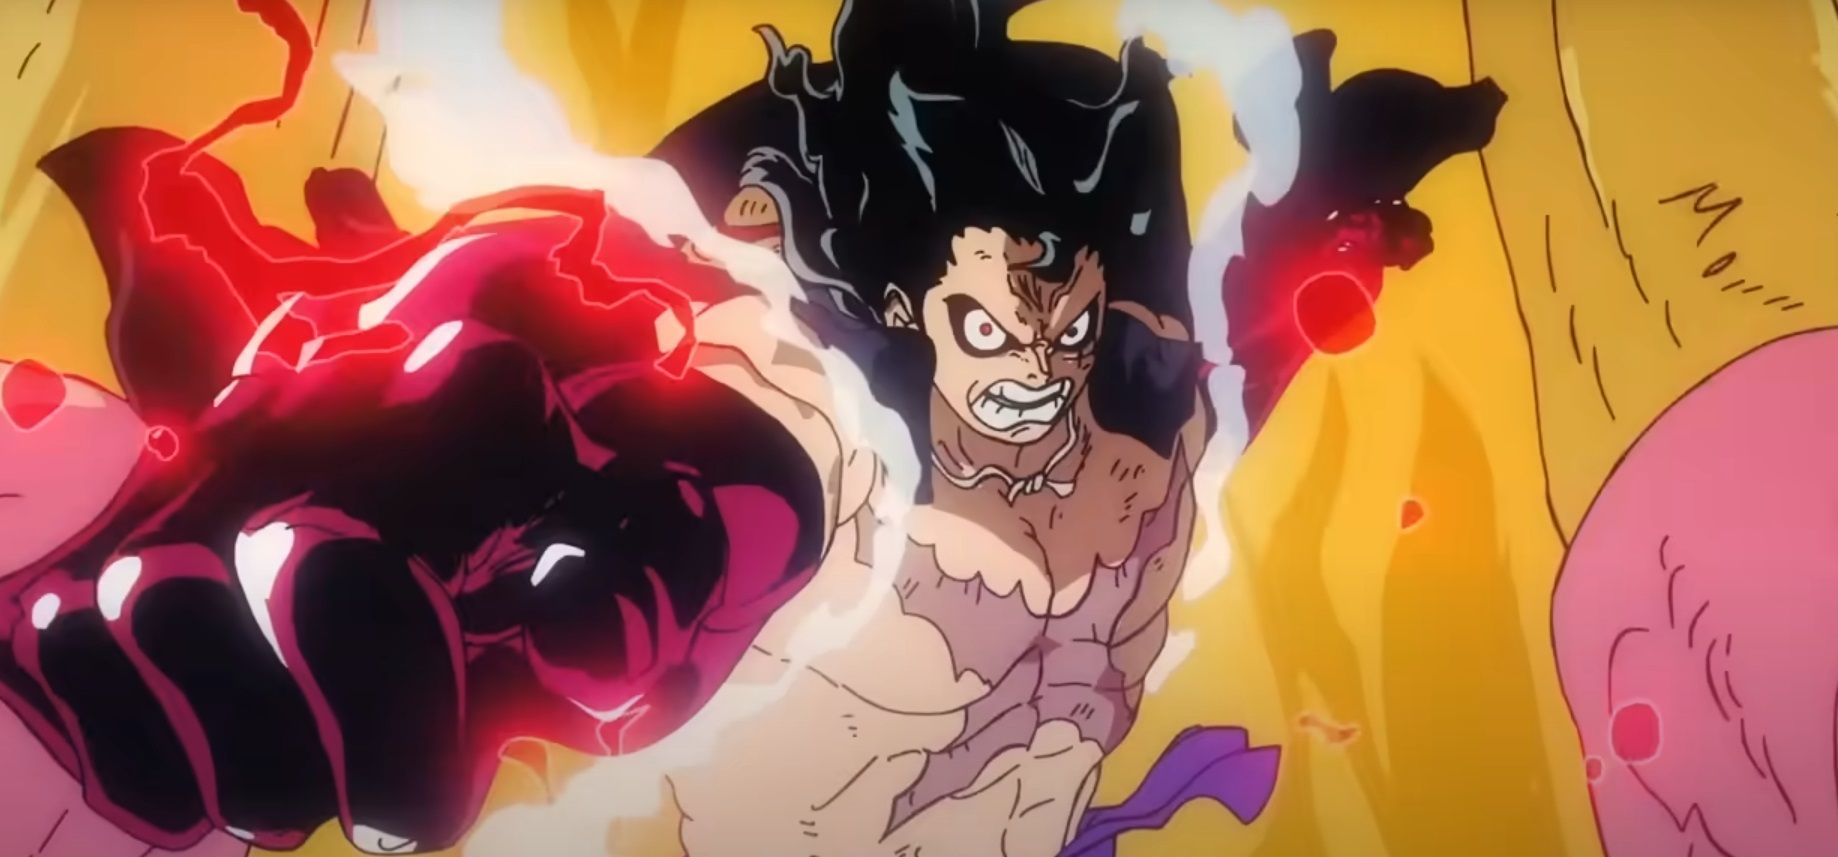 luffy uses snakeman form while fighting kaido